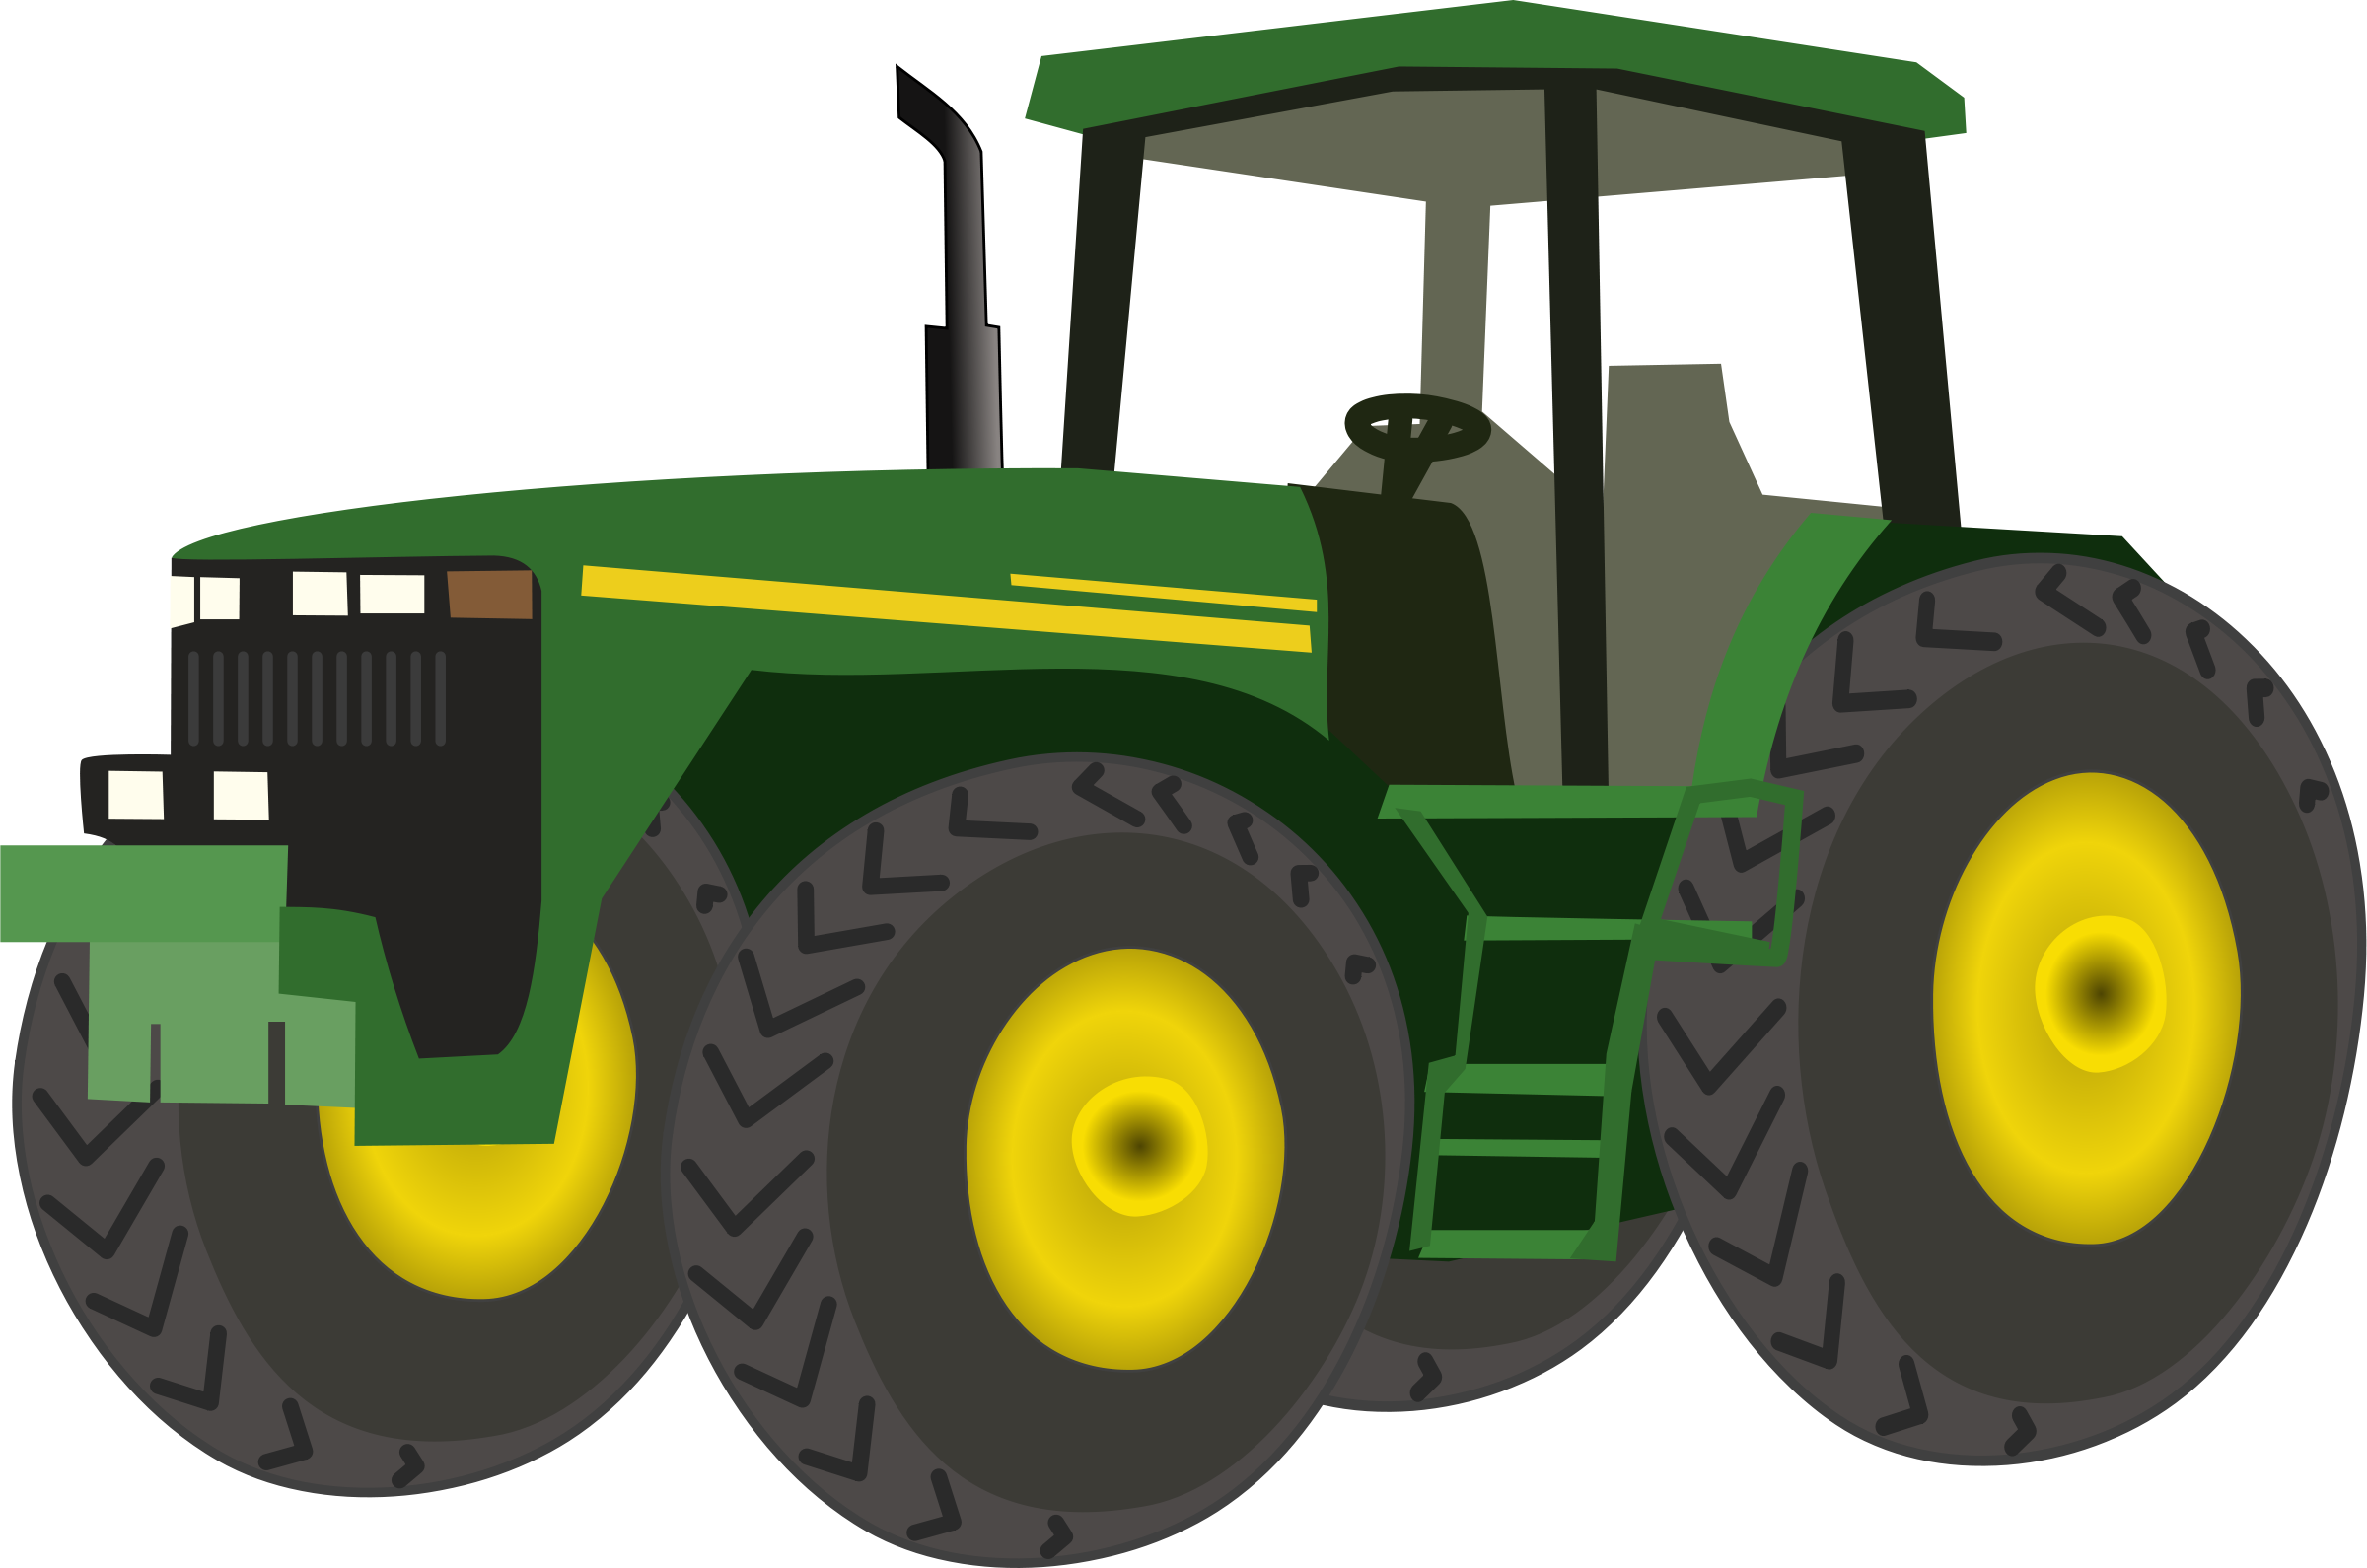 Orange Tractor Clipart   Clipart Panda   Free Clipart Images